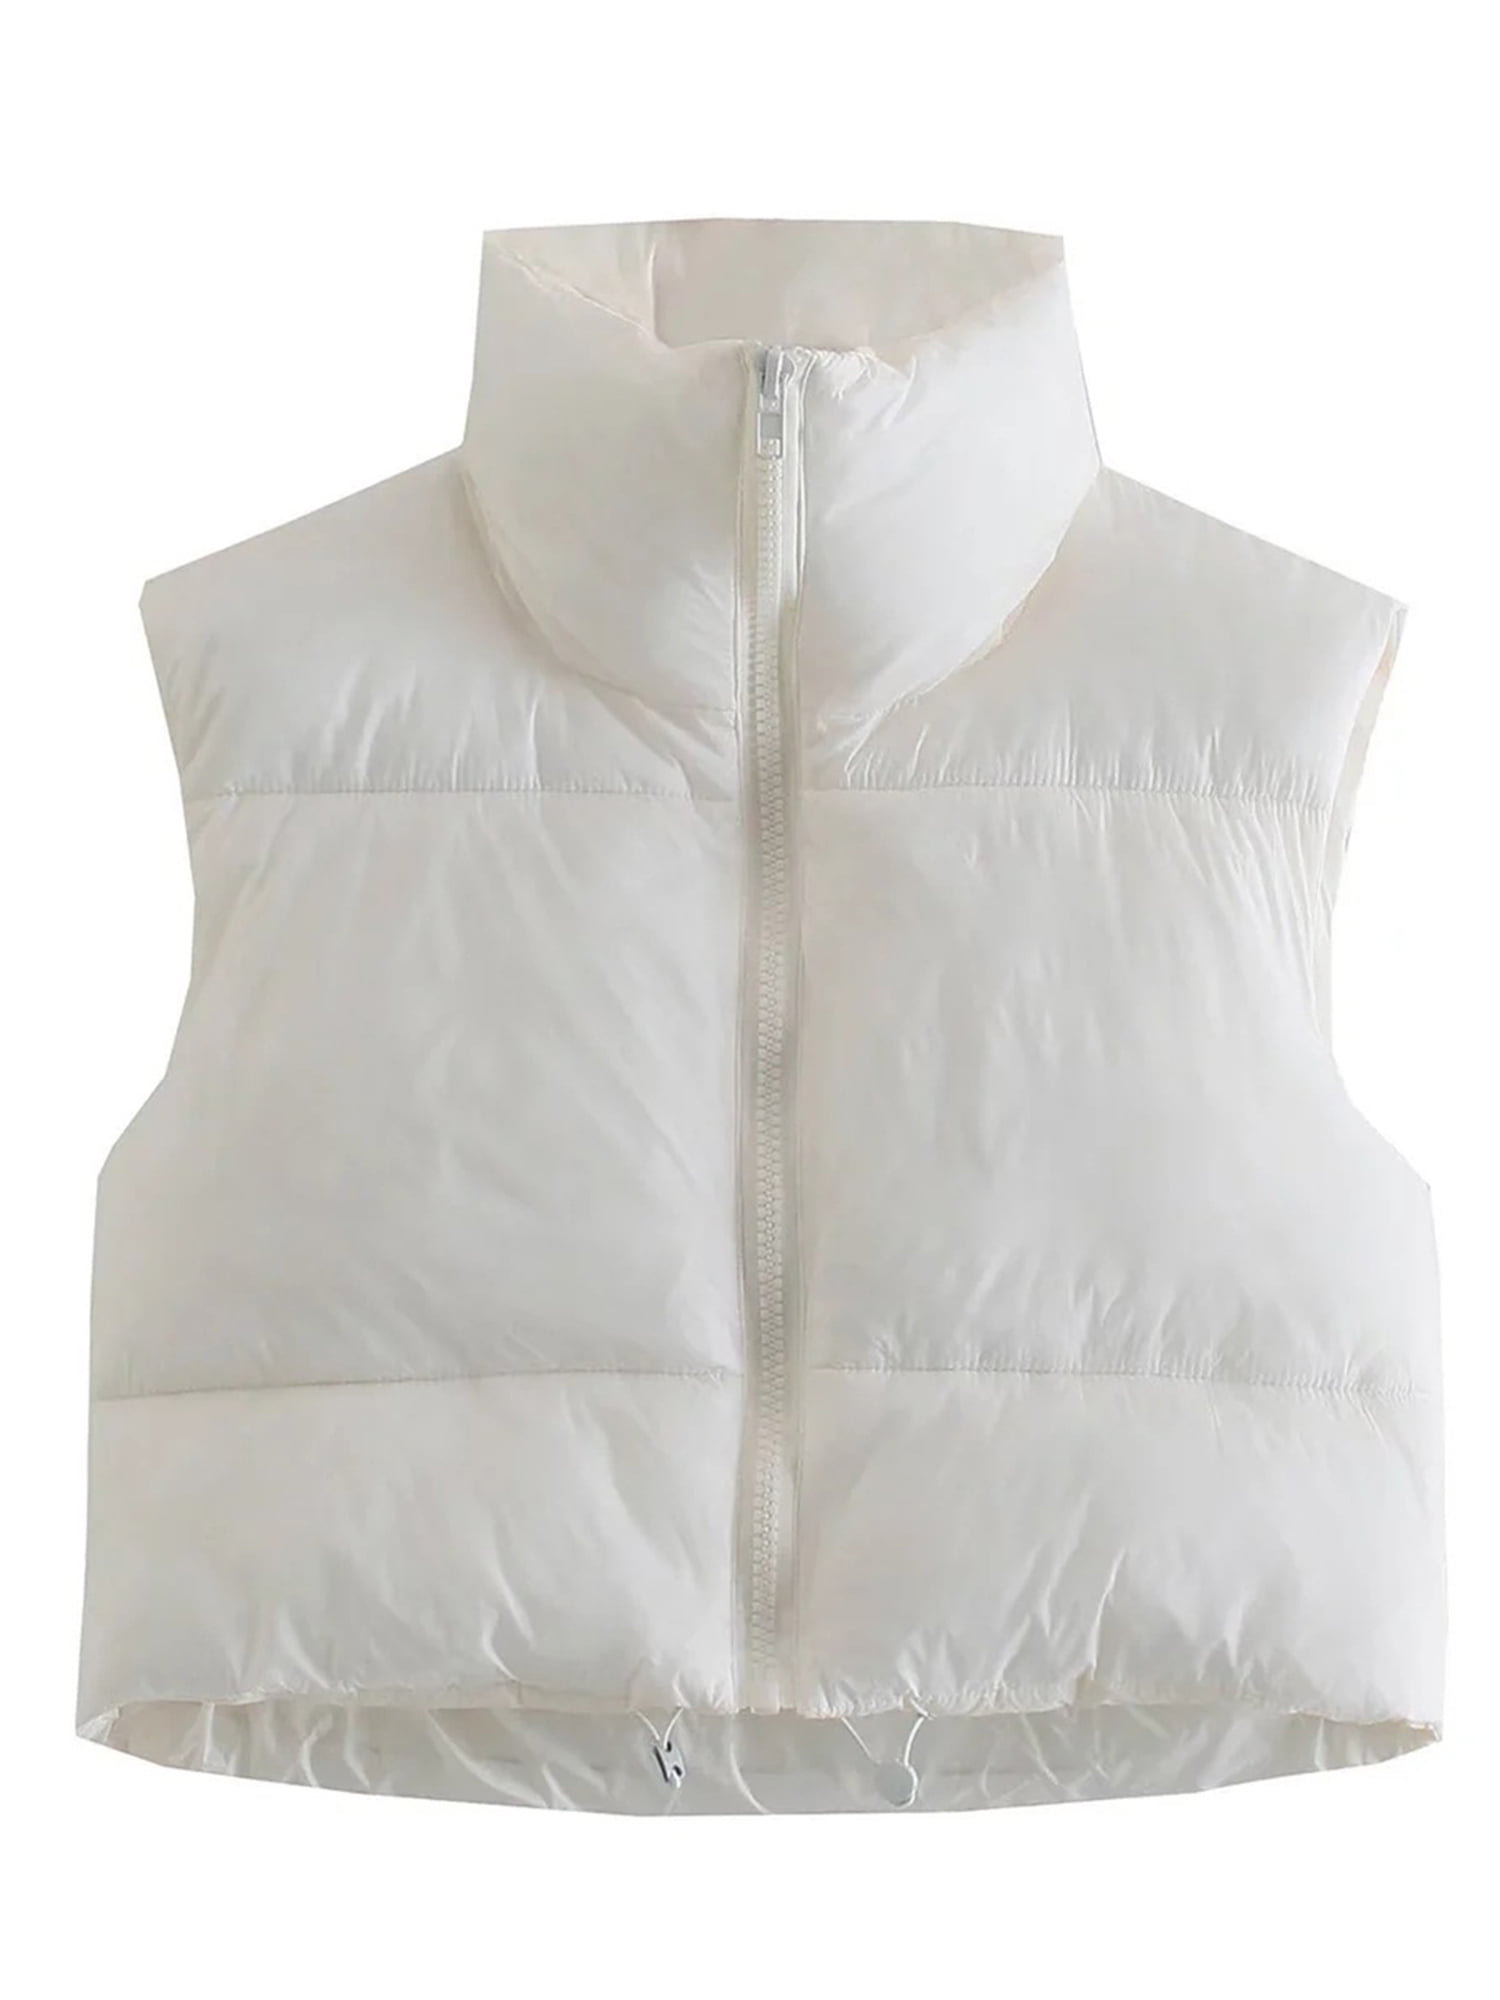 Sunisery Women Crop Puffer Vest Sleeveless Lightweight Down Jacket Quilted  Solid Color Outwear Padded Winter Warm Gilet White M